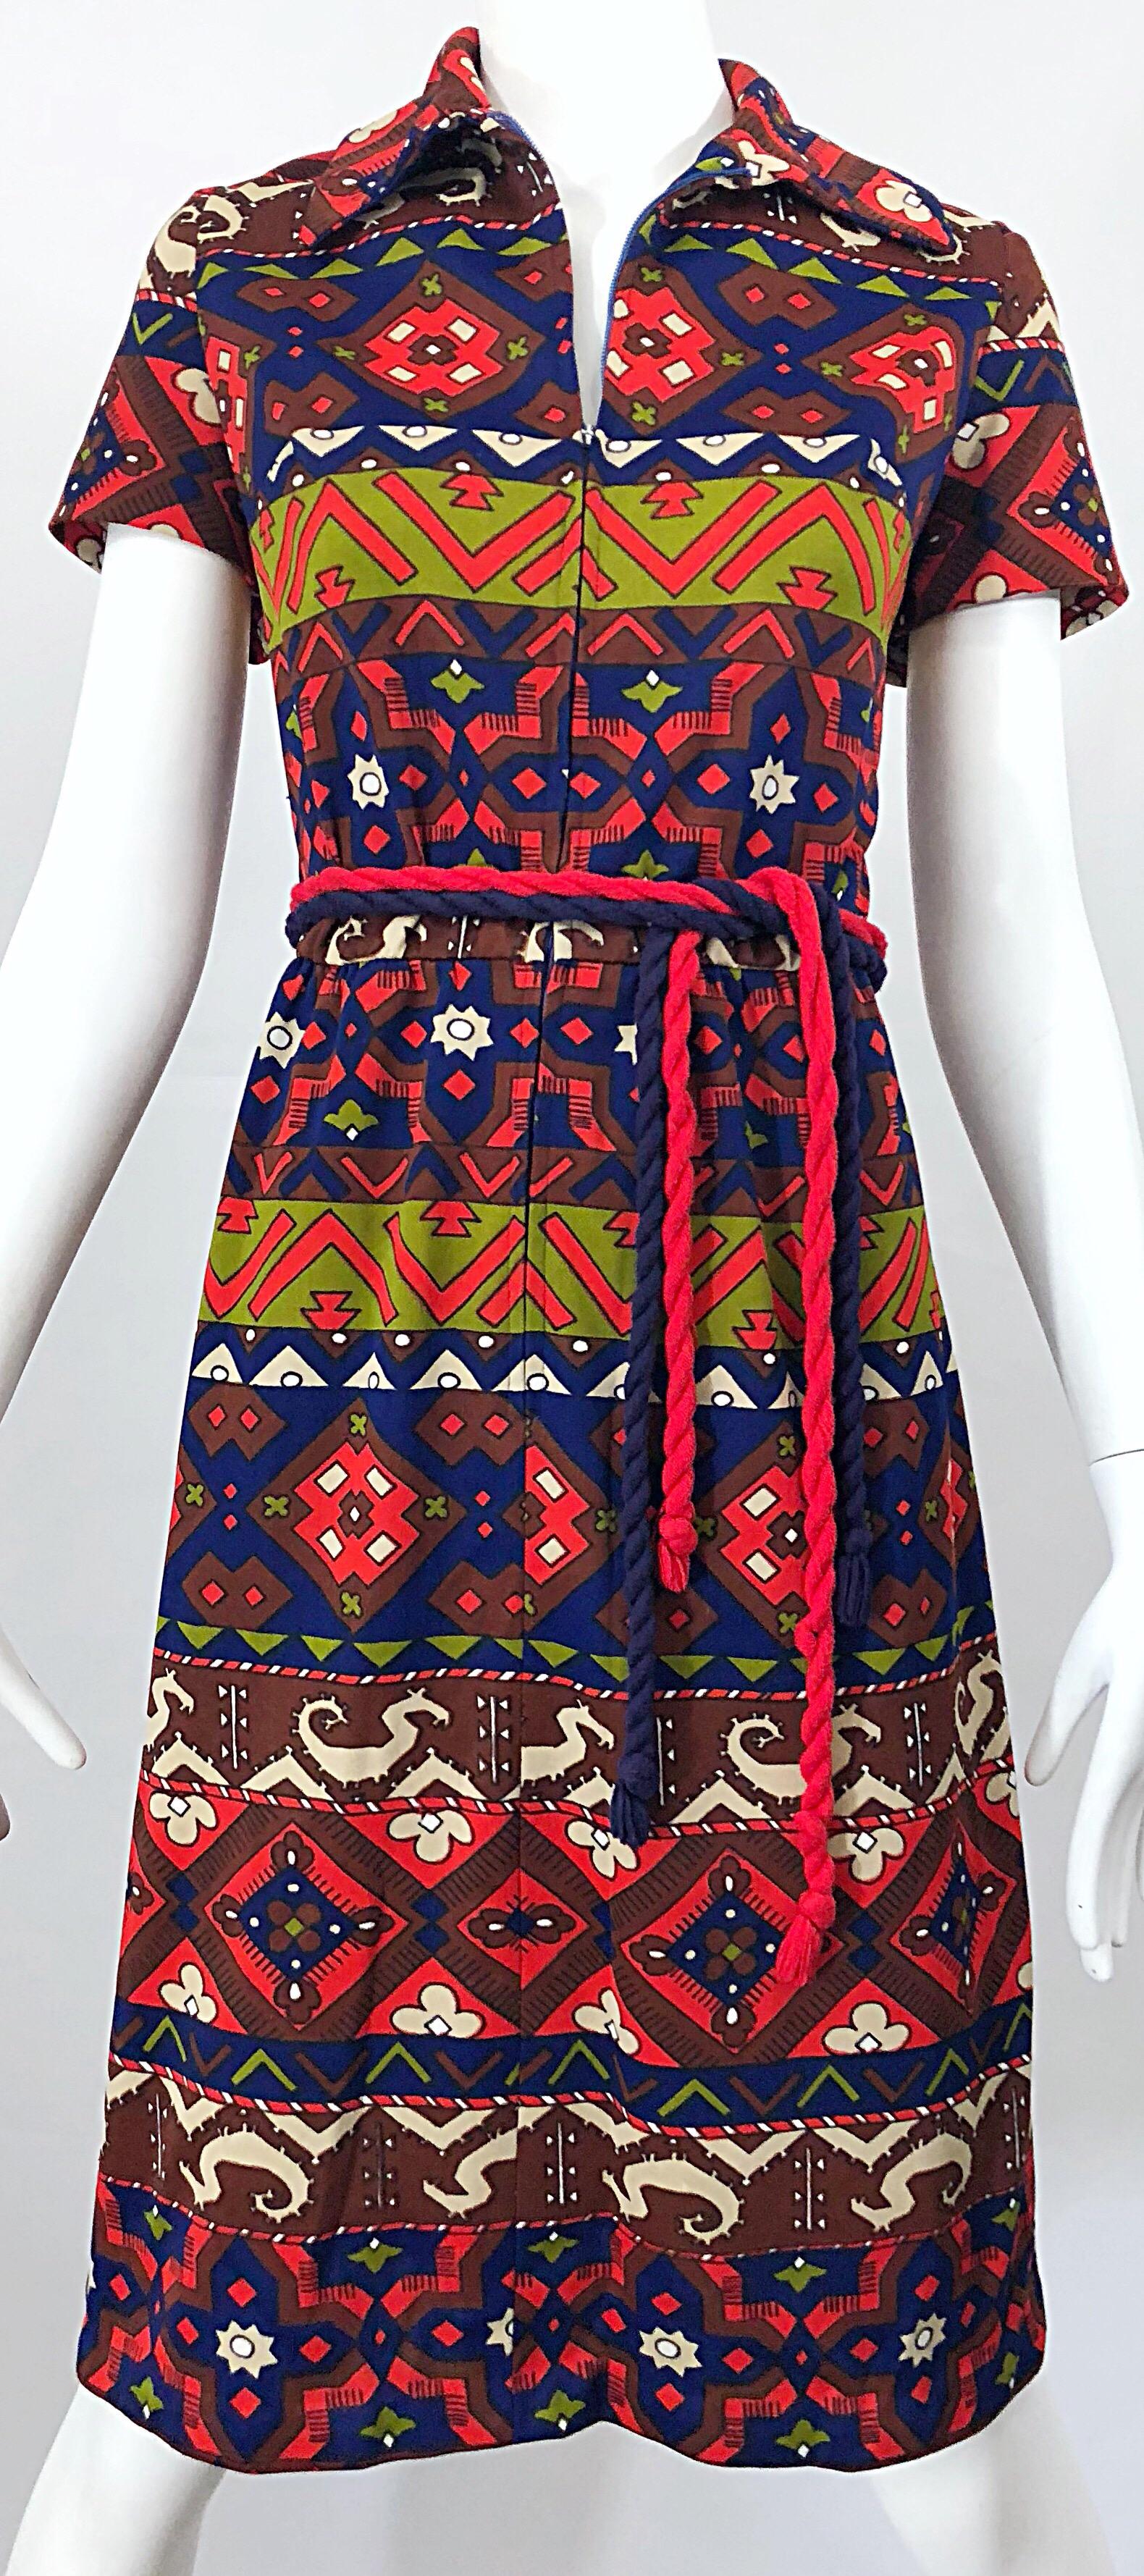 1970s Aztec Novelty Print Amazing Vintage 70s Knit Rope Belted Shirt Dress For Sale 4